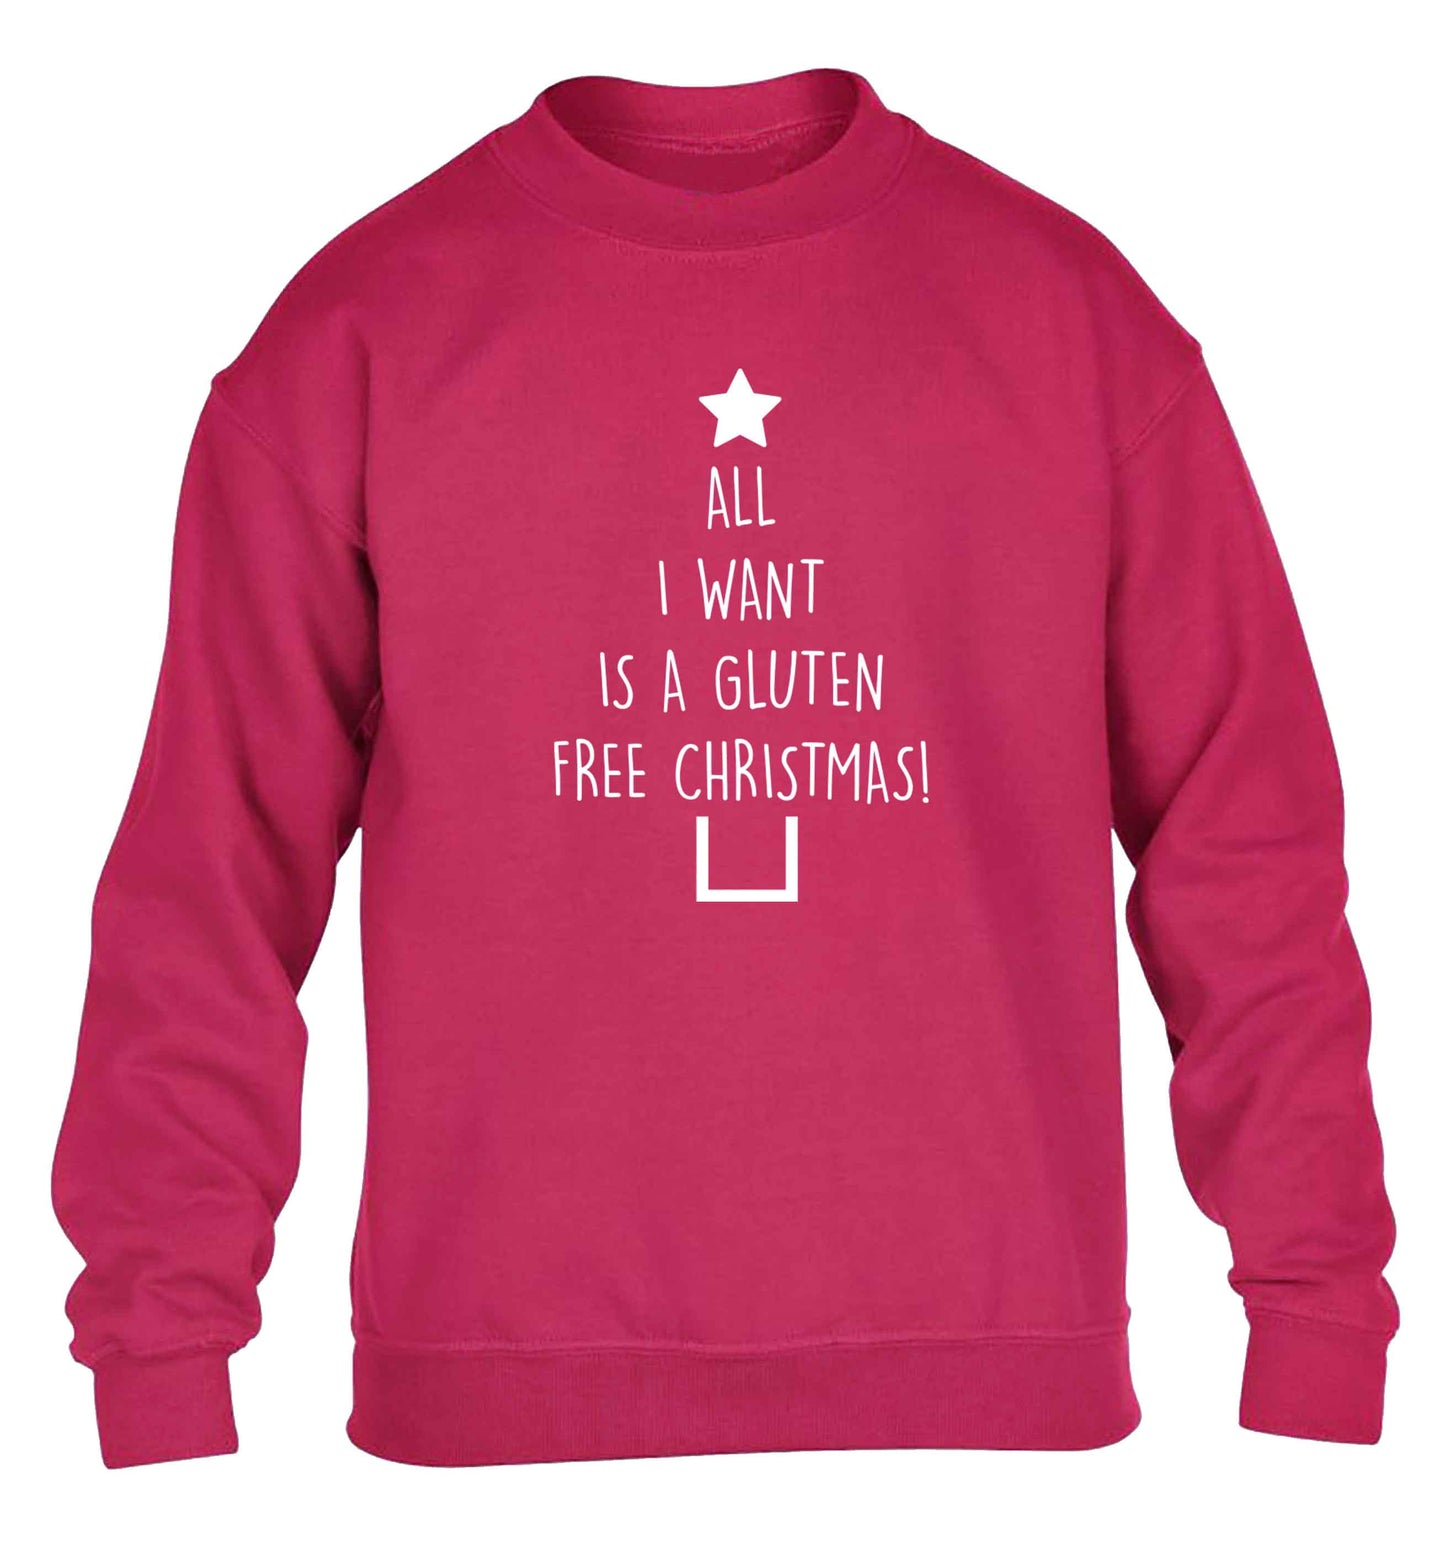 All I want is a gluten free Christmas children's pink sweater 12-13 Years